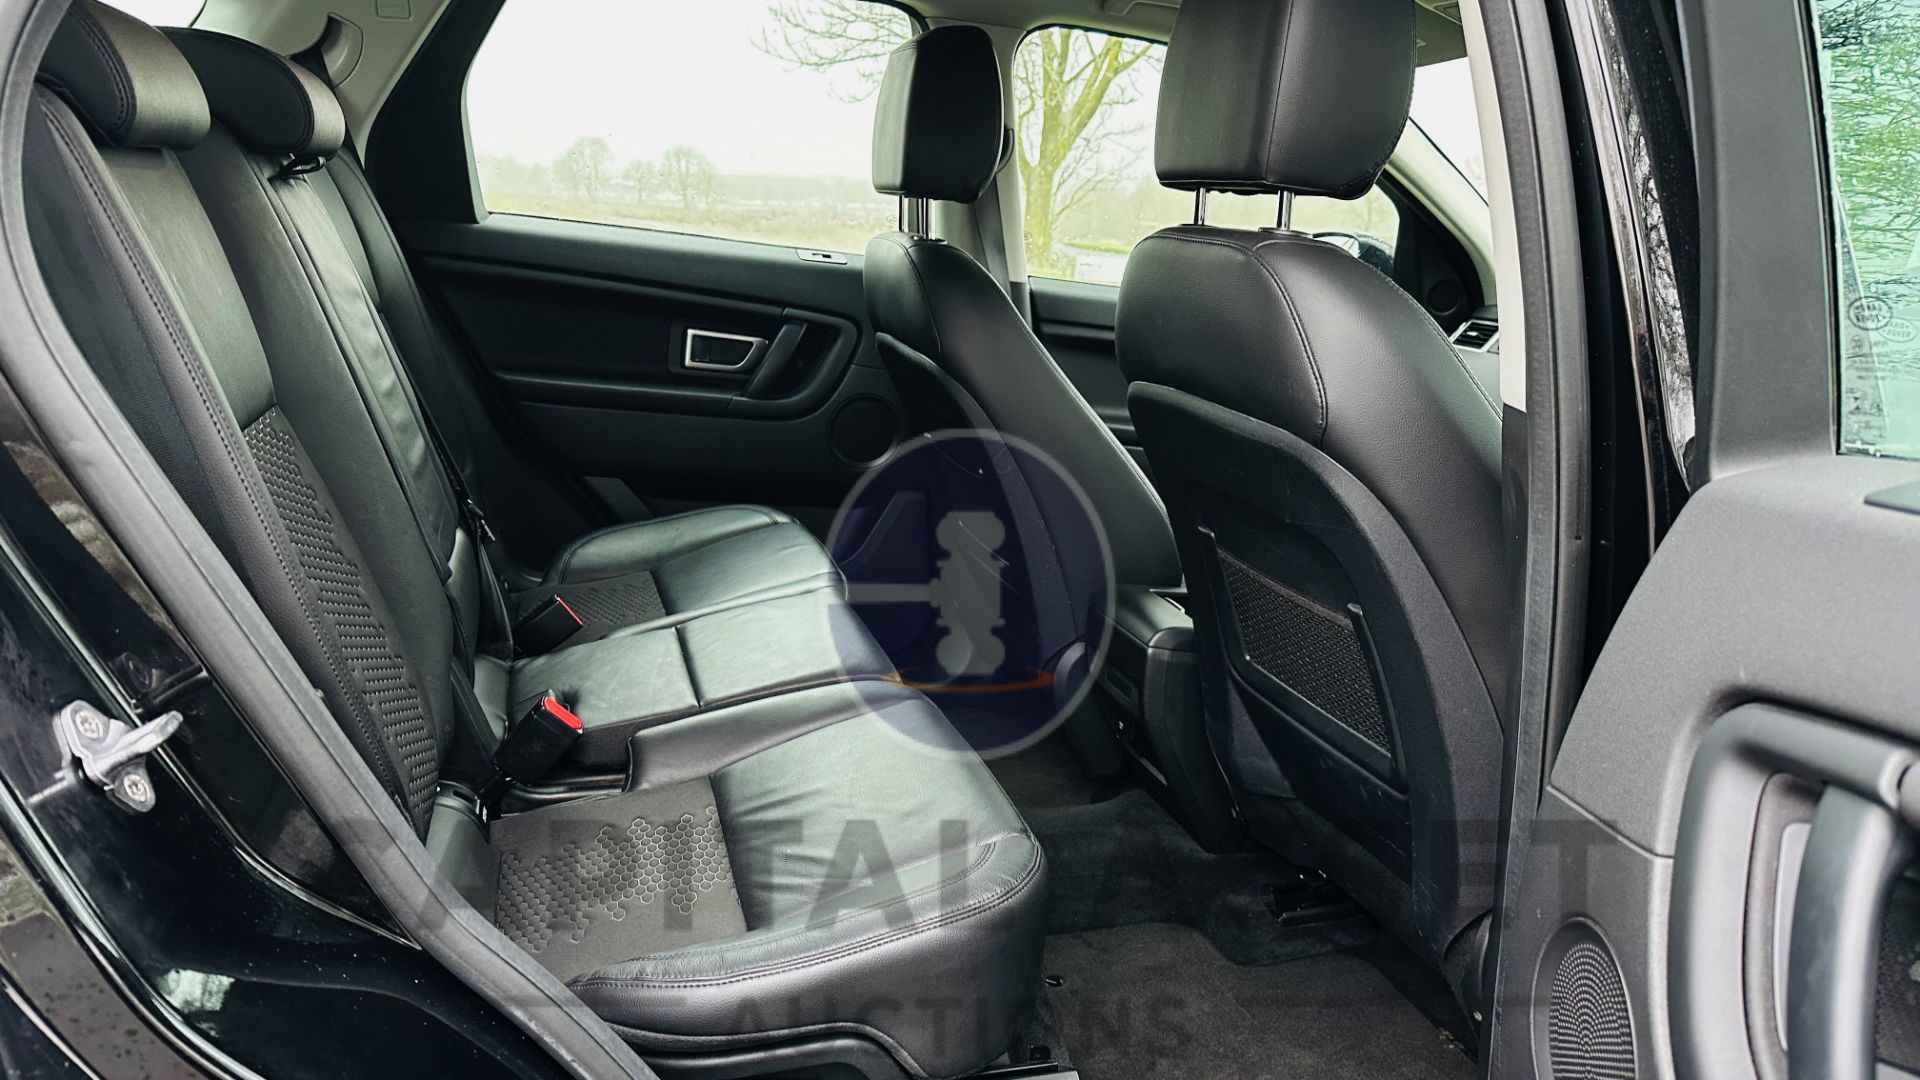 LAND ROVER DISCOVERY SPORT *5 DOOR SUV* (2019 - EURO 6) 2.0 ED4 - AUTO STOP/START *HUGE SPEC* - Image 27 of 41